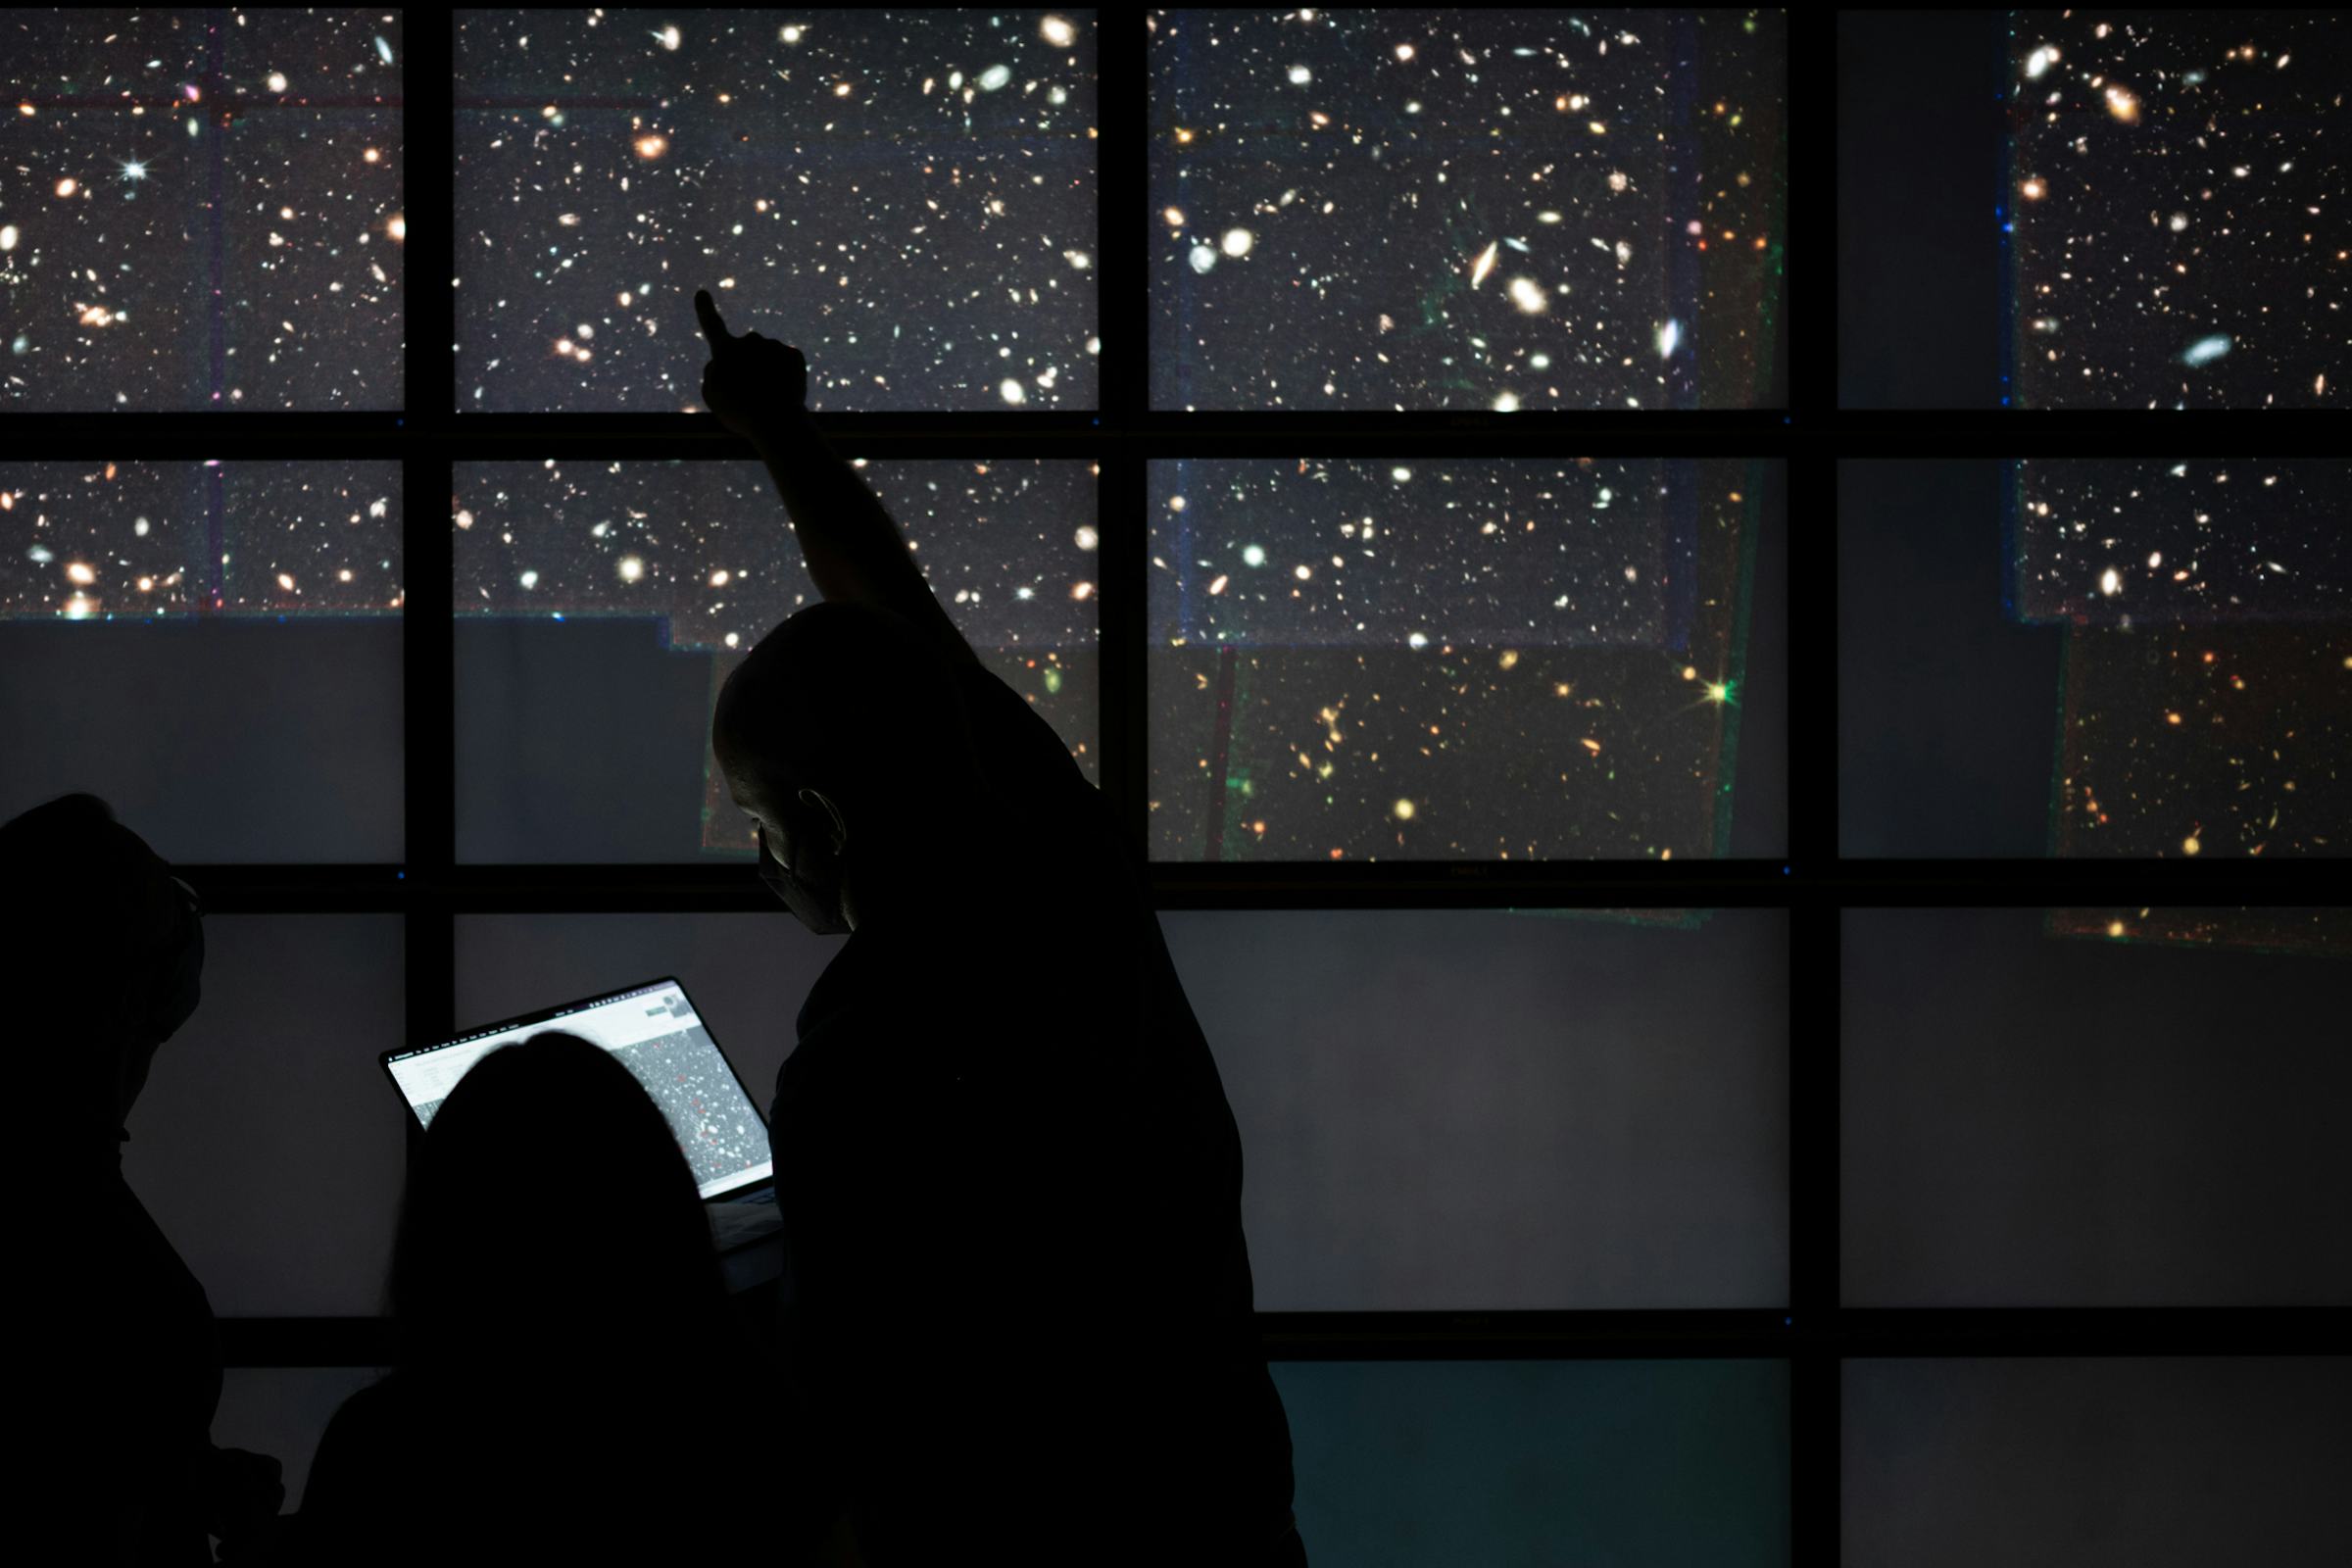 Silhouettes of three people in front of a large display of stars and galaxies, one person pointing at a specific spot